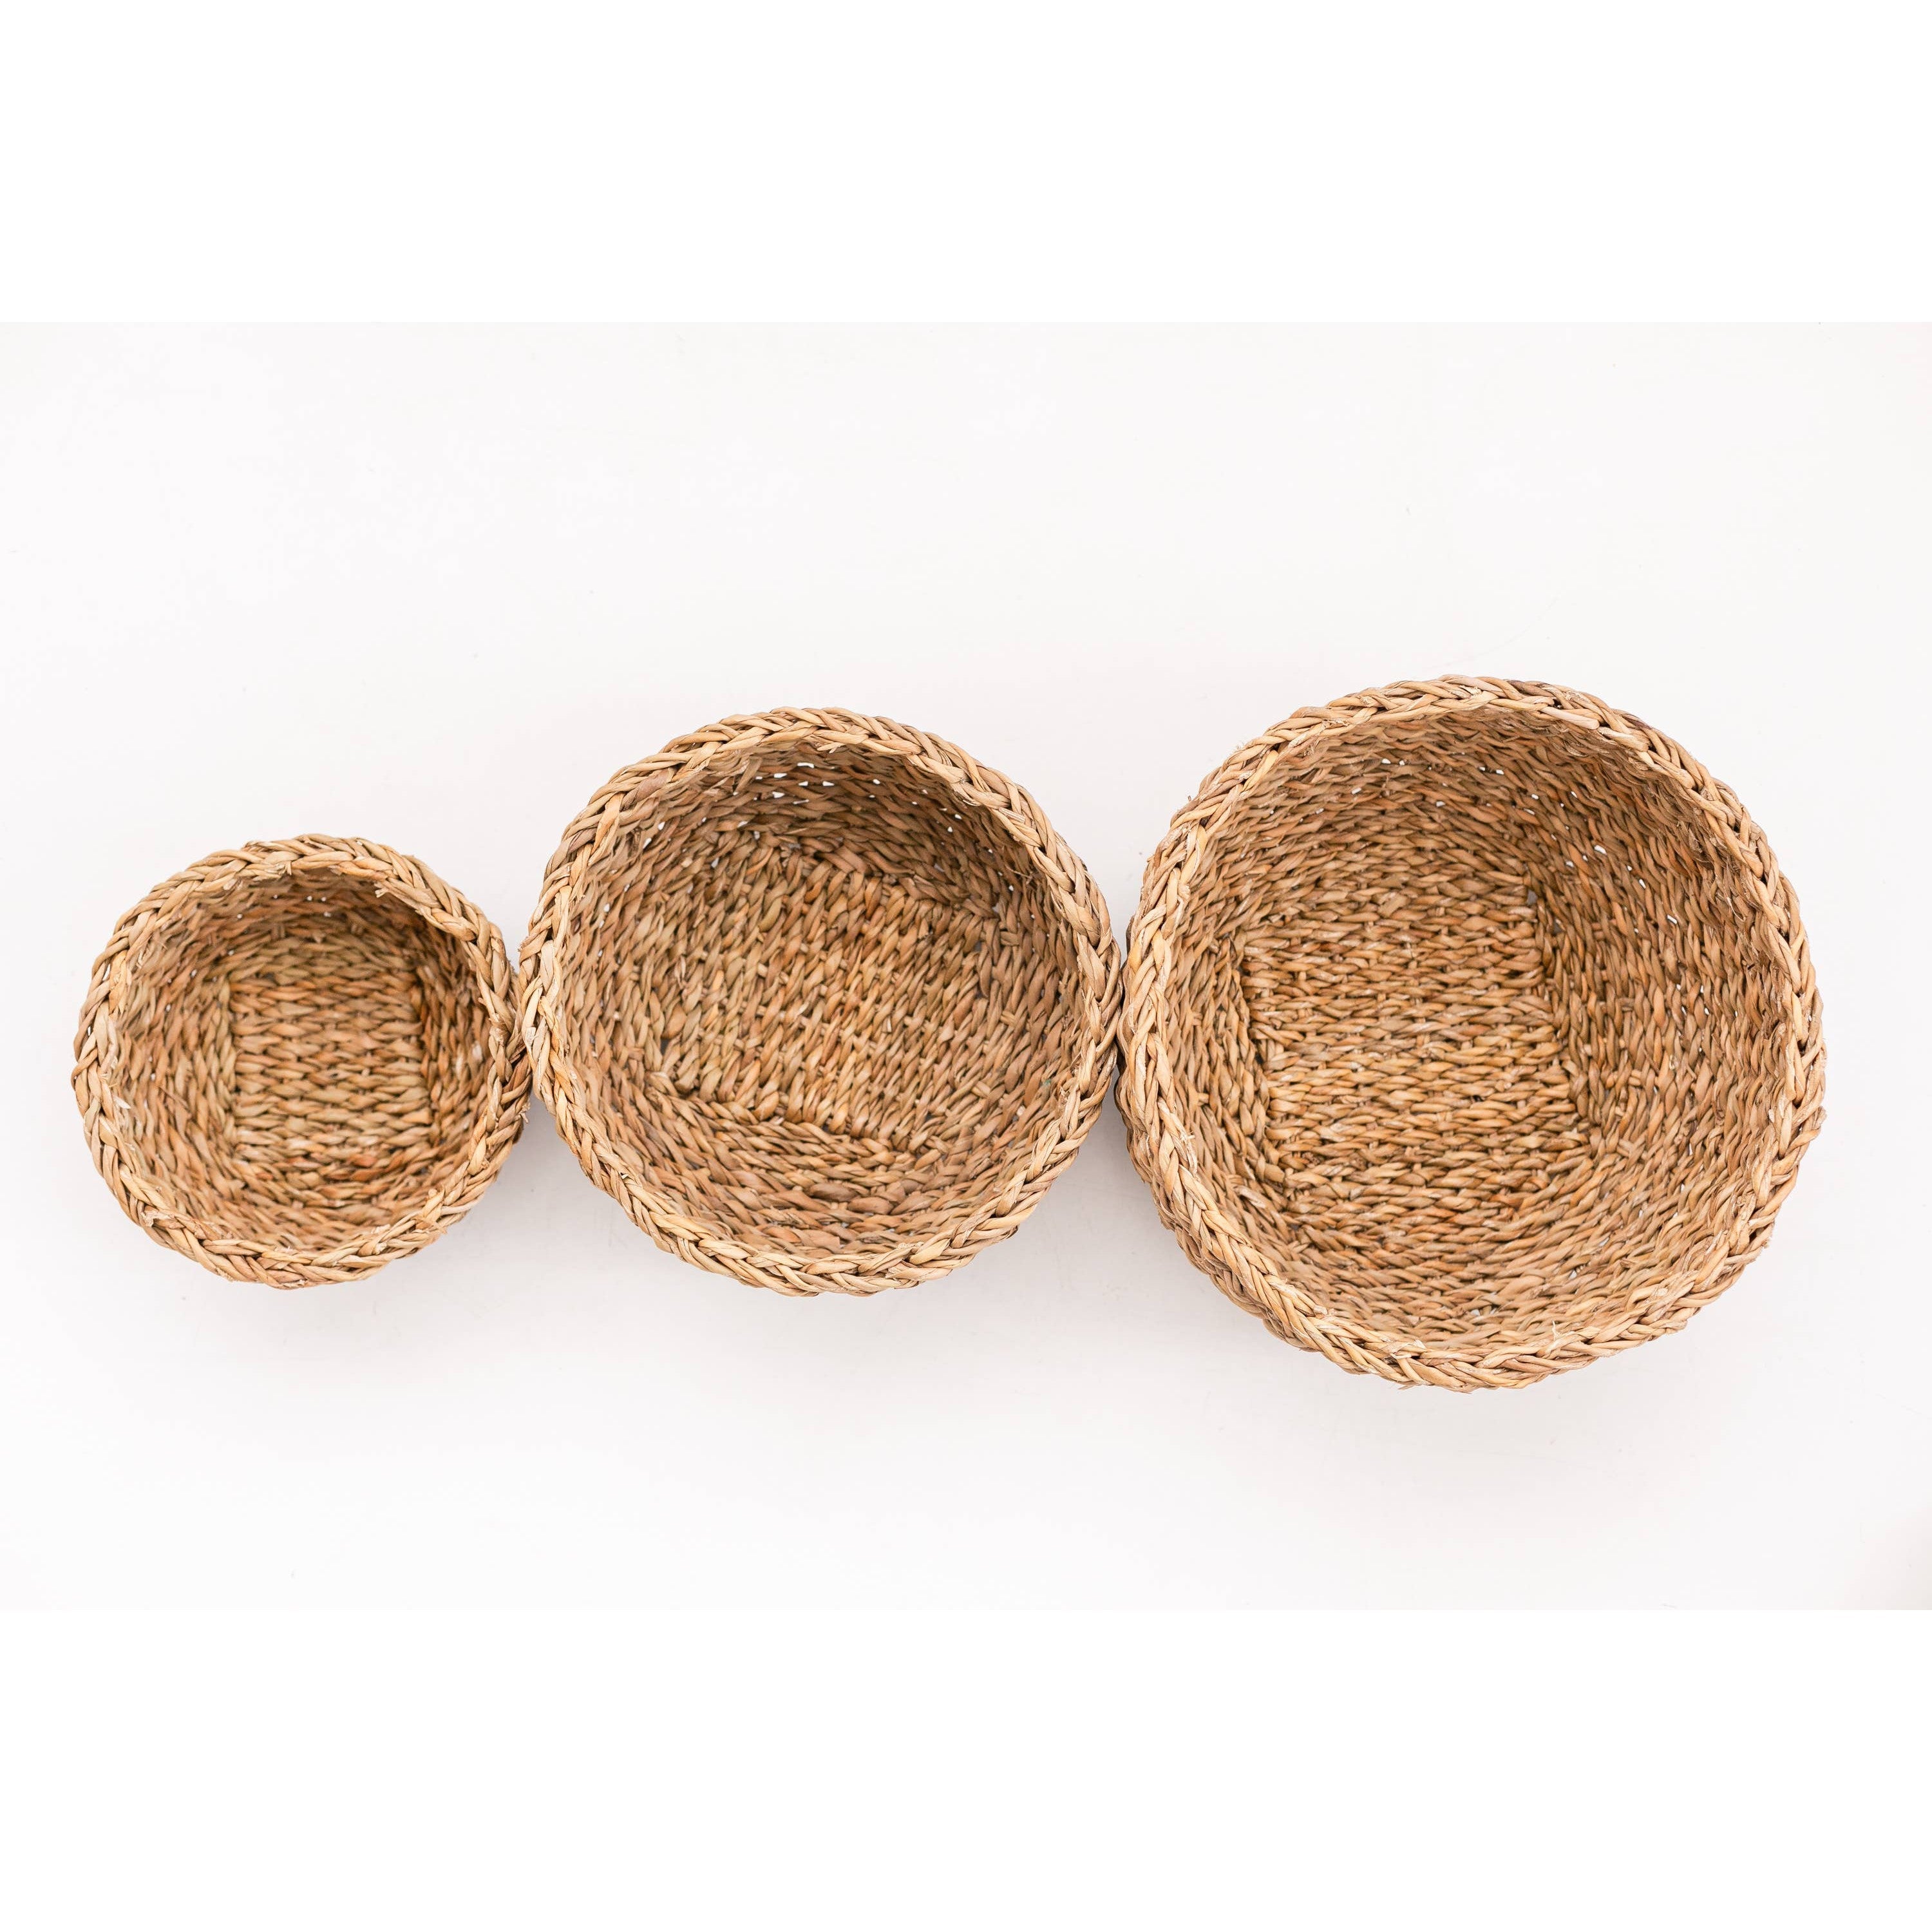 Catchall Seagrass Baskets - Sold Individually (*Local Pickup/Local Delivery Only)